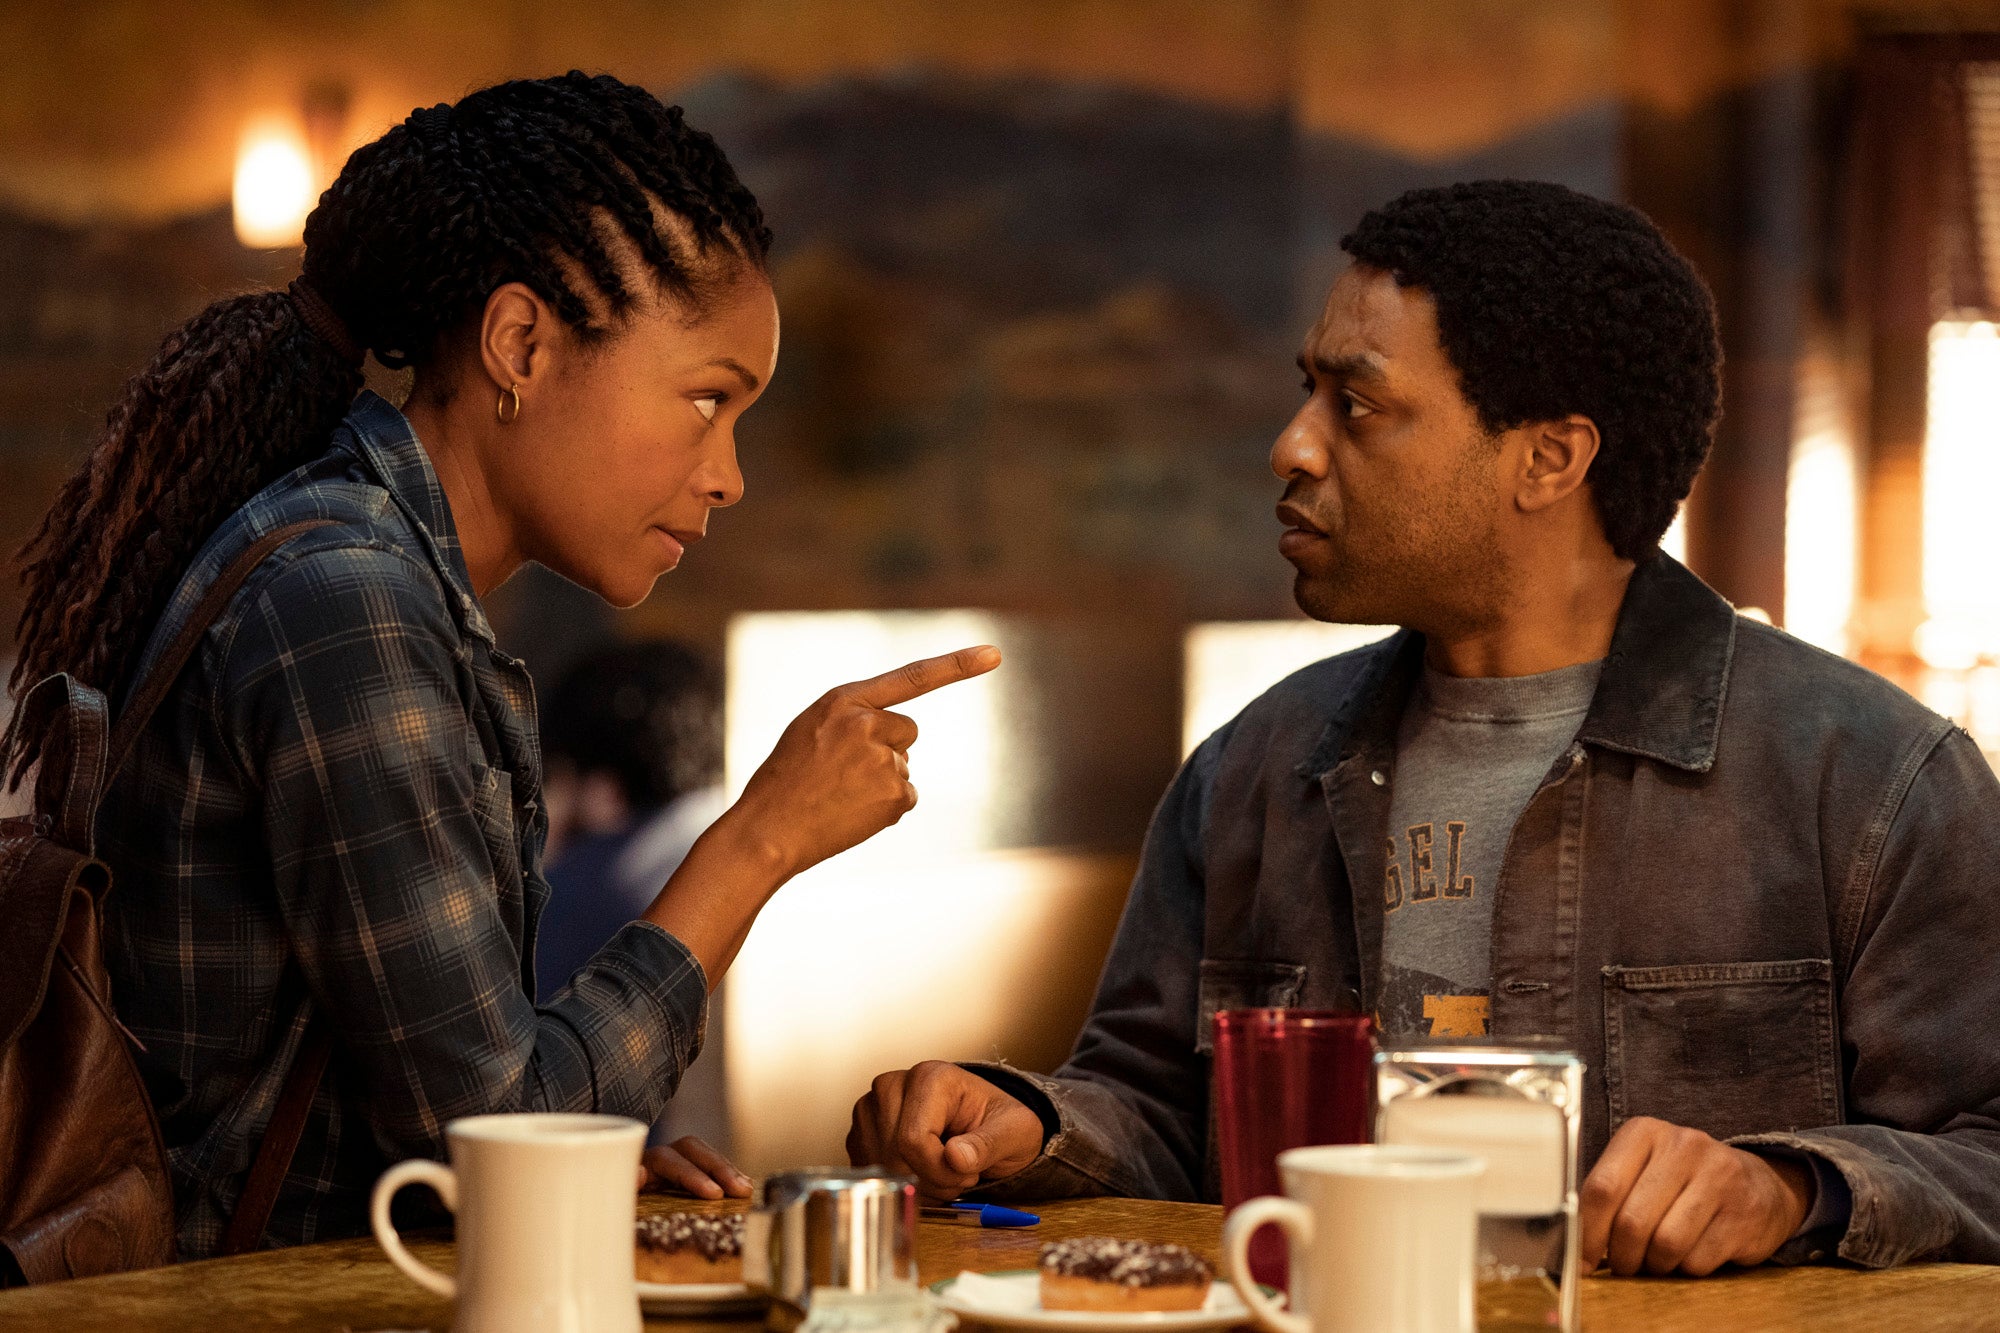 Naomie Harris’s Justin Falls tells Chiwetel Ejiofor’s alien Faraday a lesson in human decency in ‘The Man Who Fell to Earth’